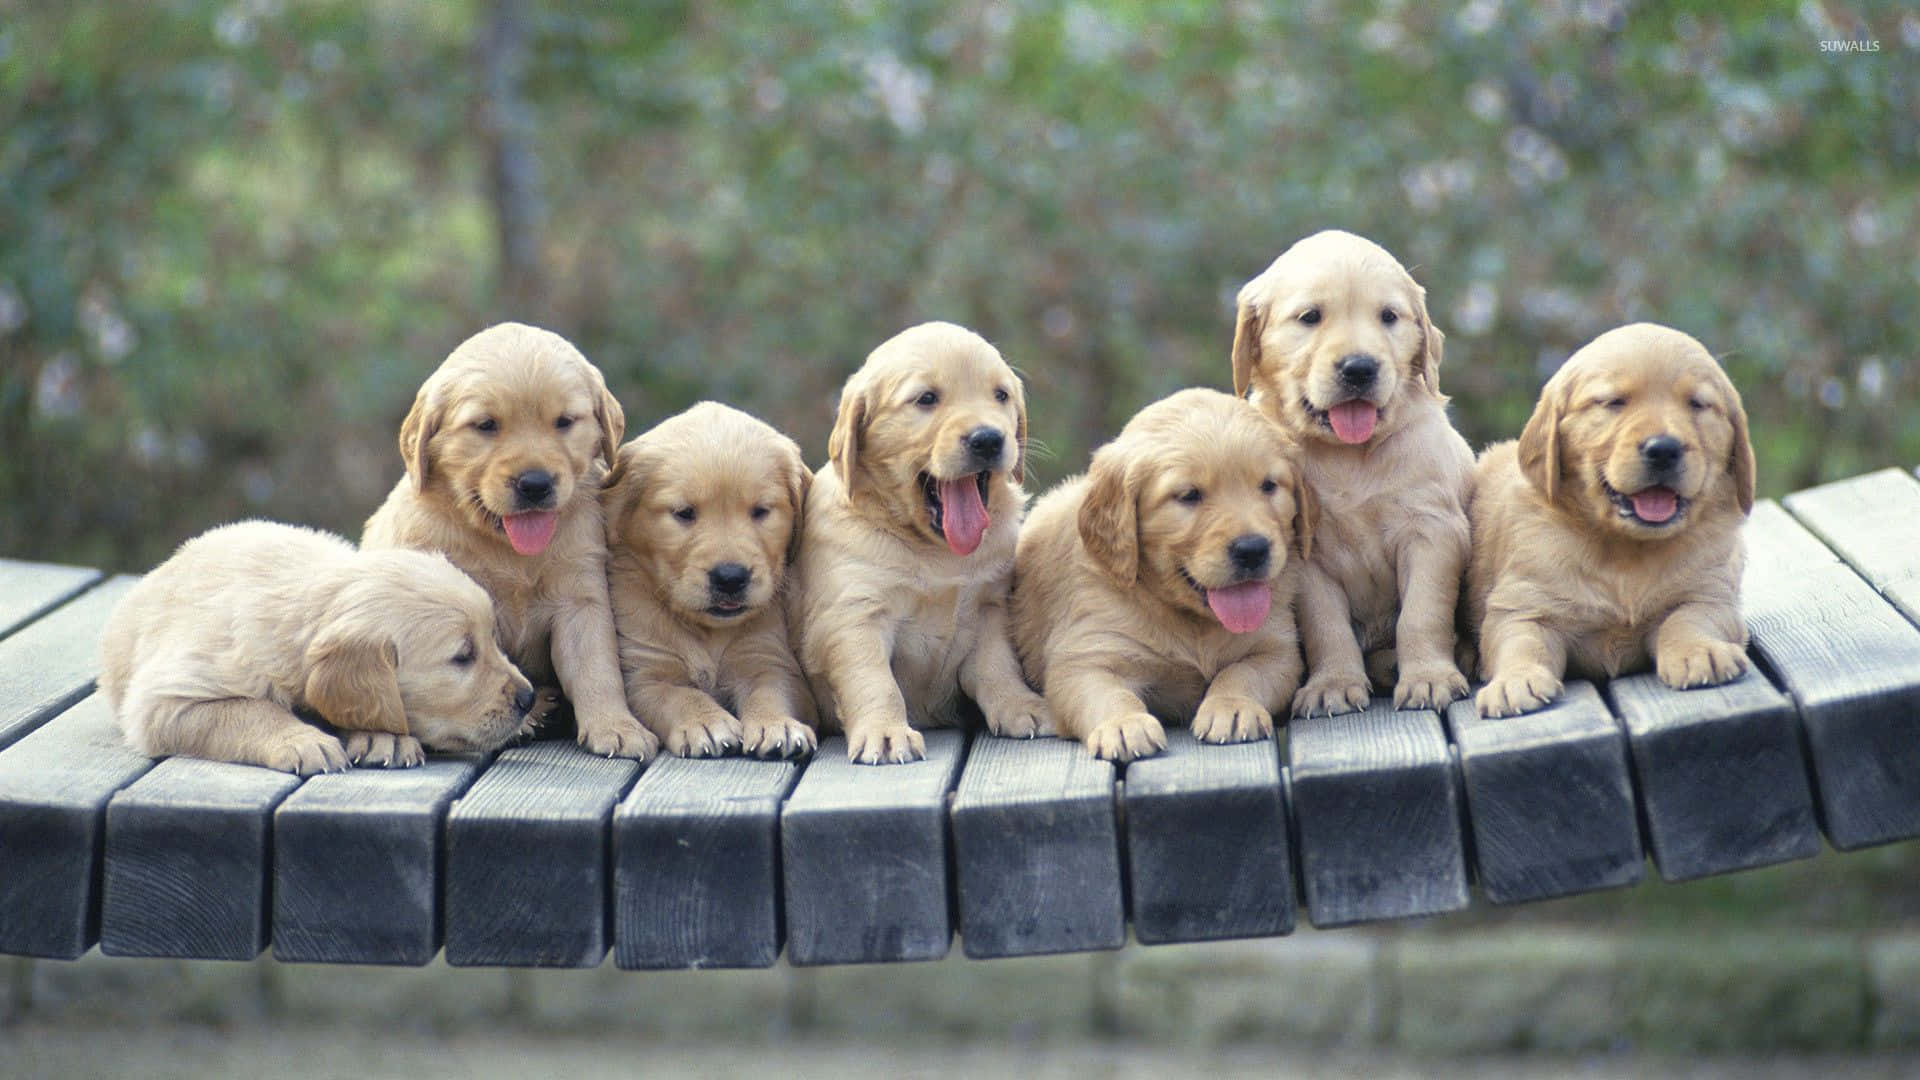 Explore the world with this Golden Retriever Puppy Wallpaper